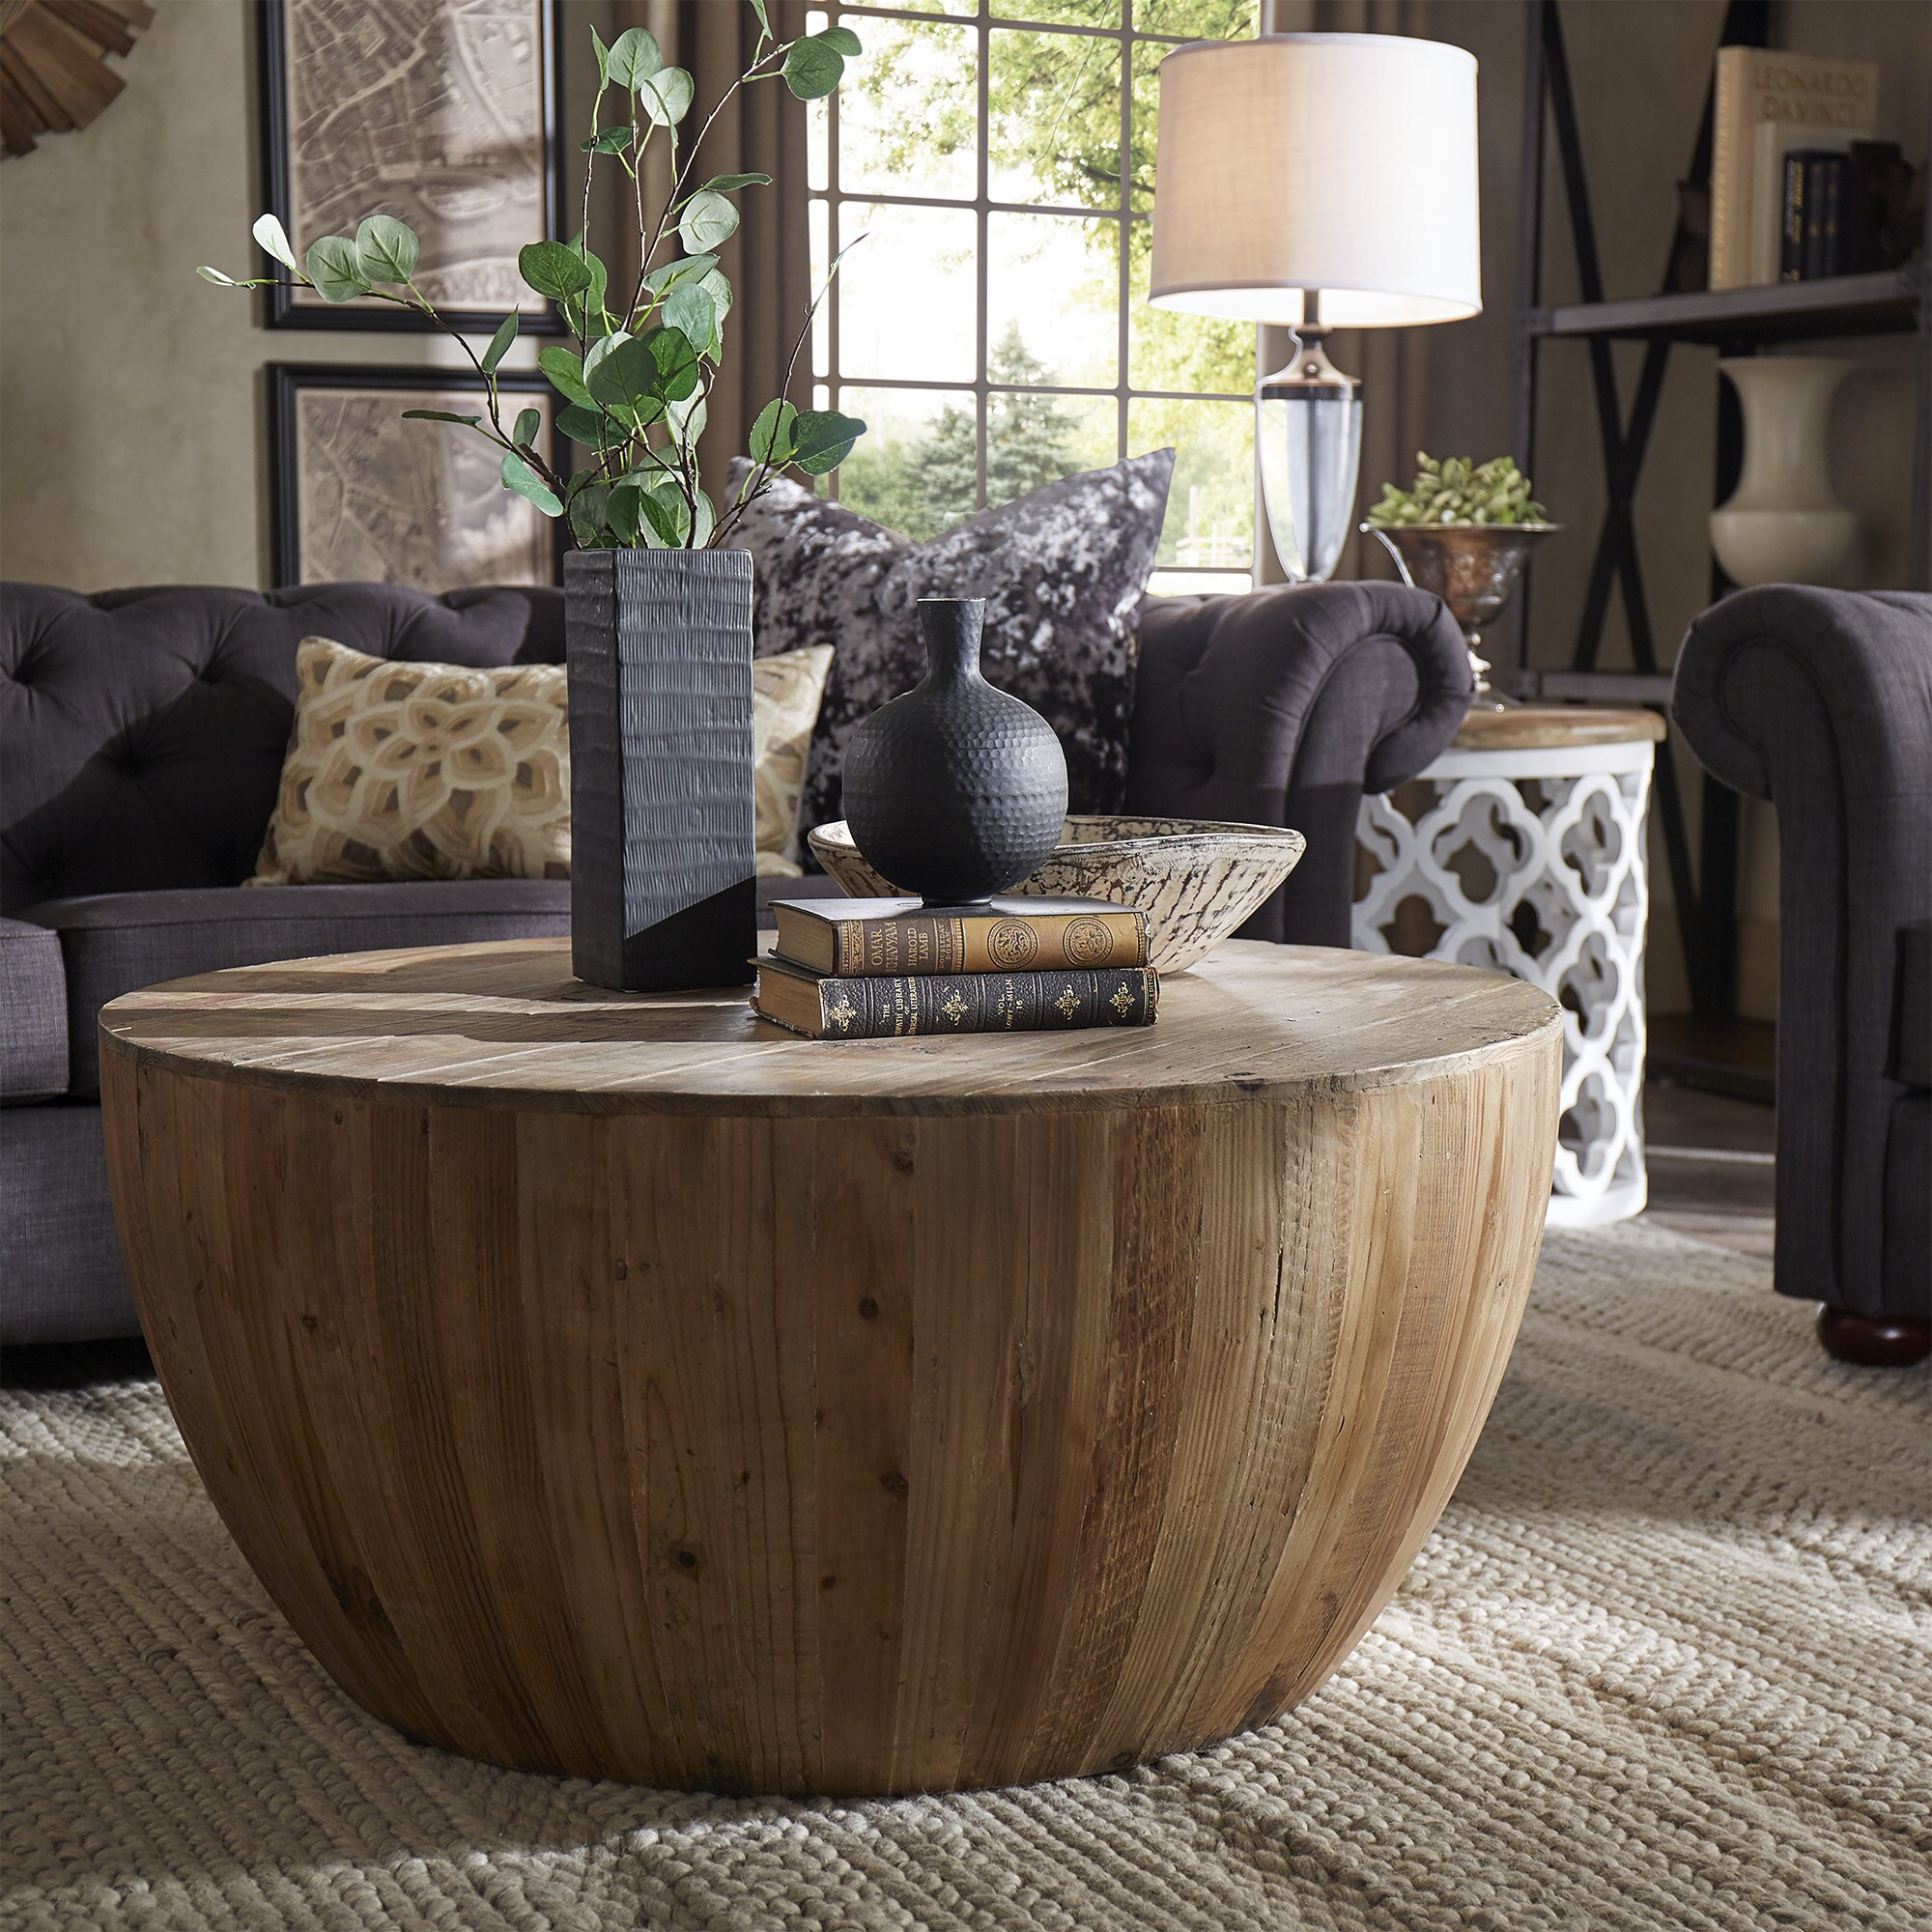 Another common type of wood used for furniture materials is reclaimed wood. In this image, we have the Reclaimed Woodblock Drum Shape Coffee Table by iNSPIRE Q Artisan.